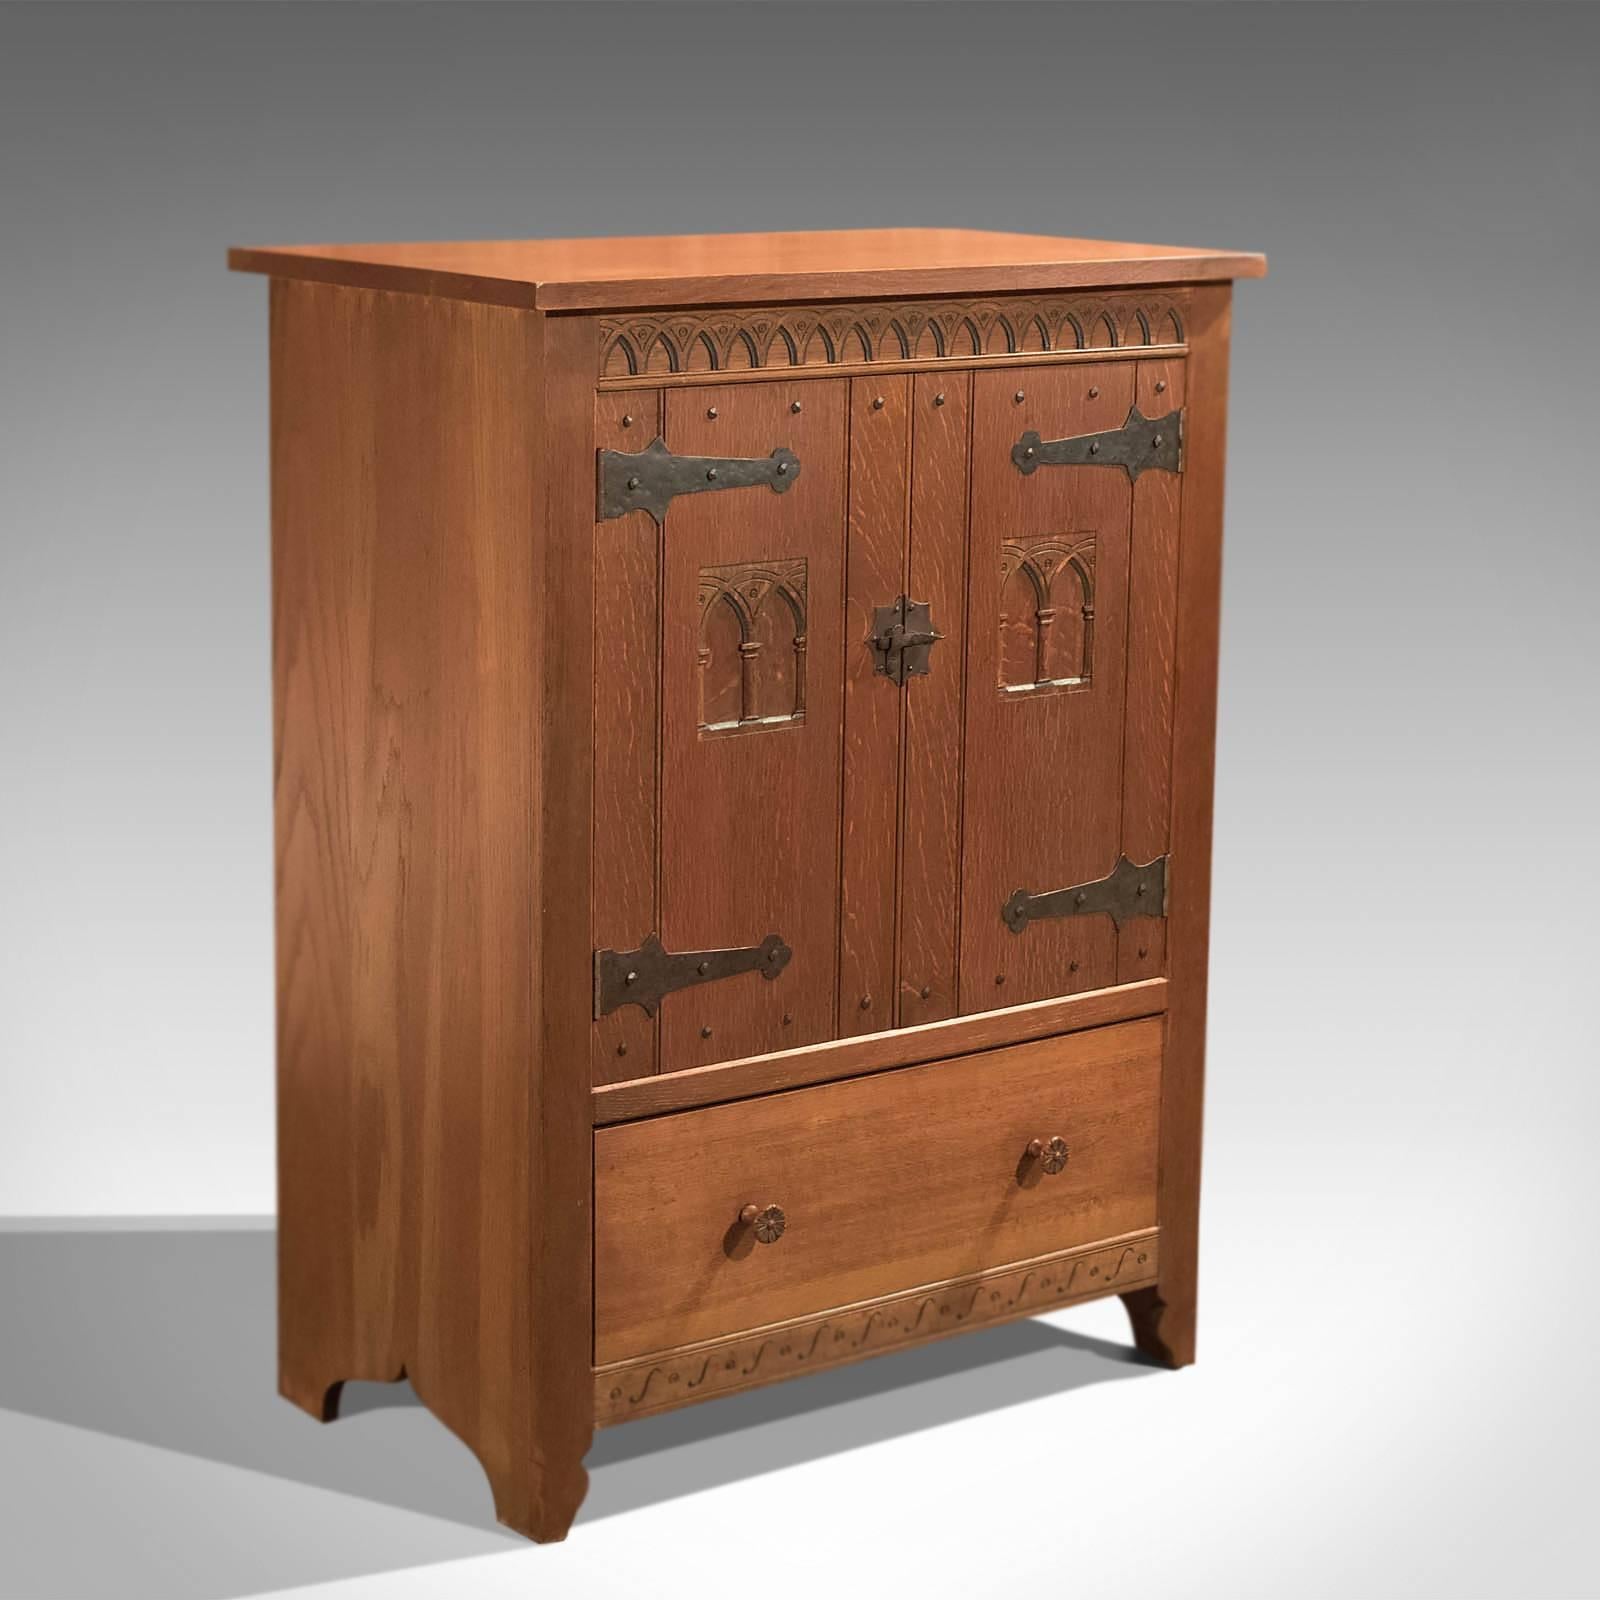 This is a vintage Mid-Century high quality oak cabinet in the tradition of the Arts & Crafts movement.

Raised on shaped feet and in good proportion, the two door cabinet sits above the single, deep drawer, unfussy and dressed with modest pulls